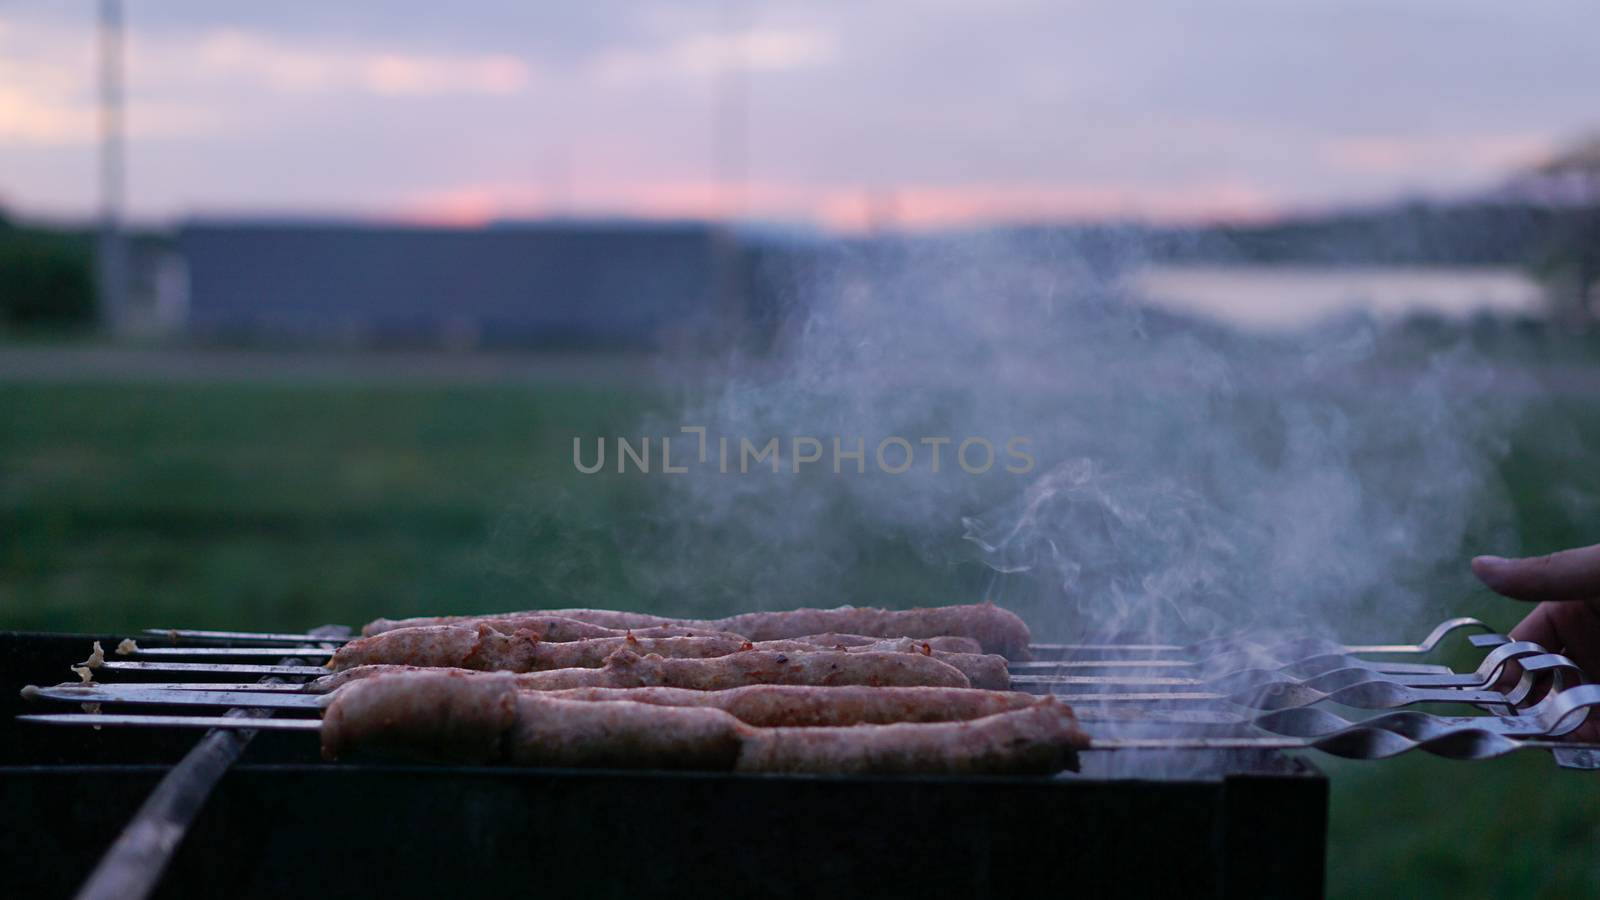 Grilling sausages at sunset outdoors gathering with friends and family by natali_brill